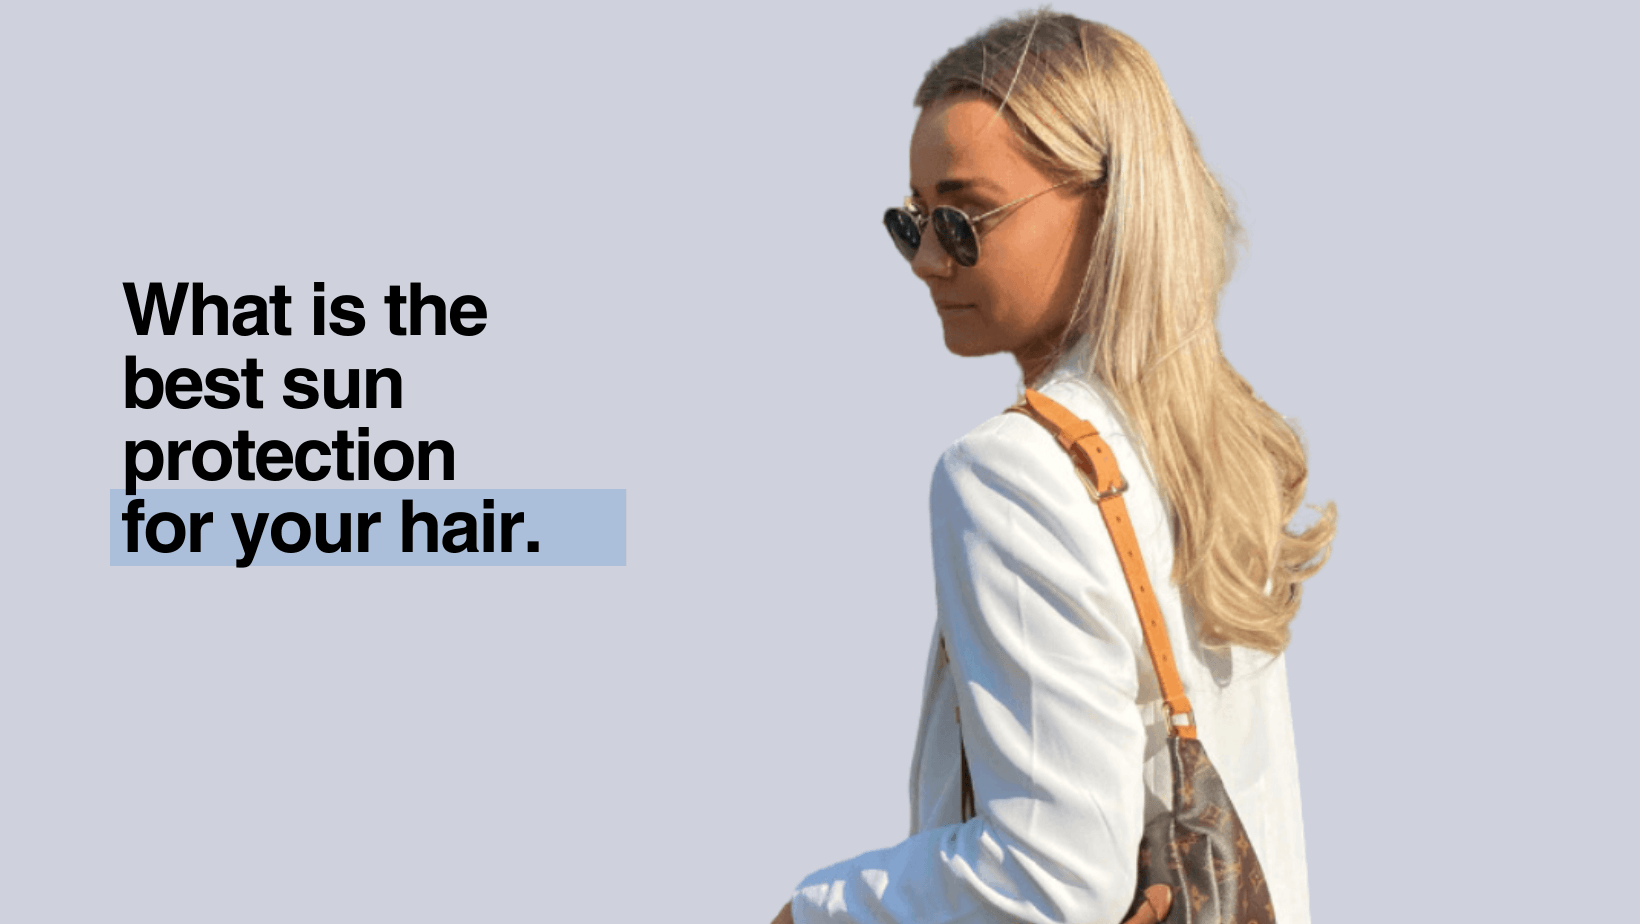 What Is The Best Sun Protection For Your Hair?